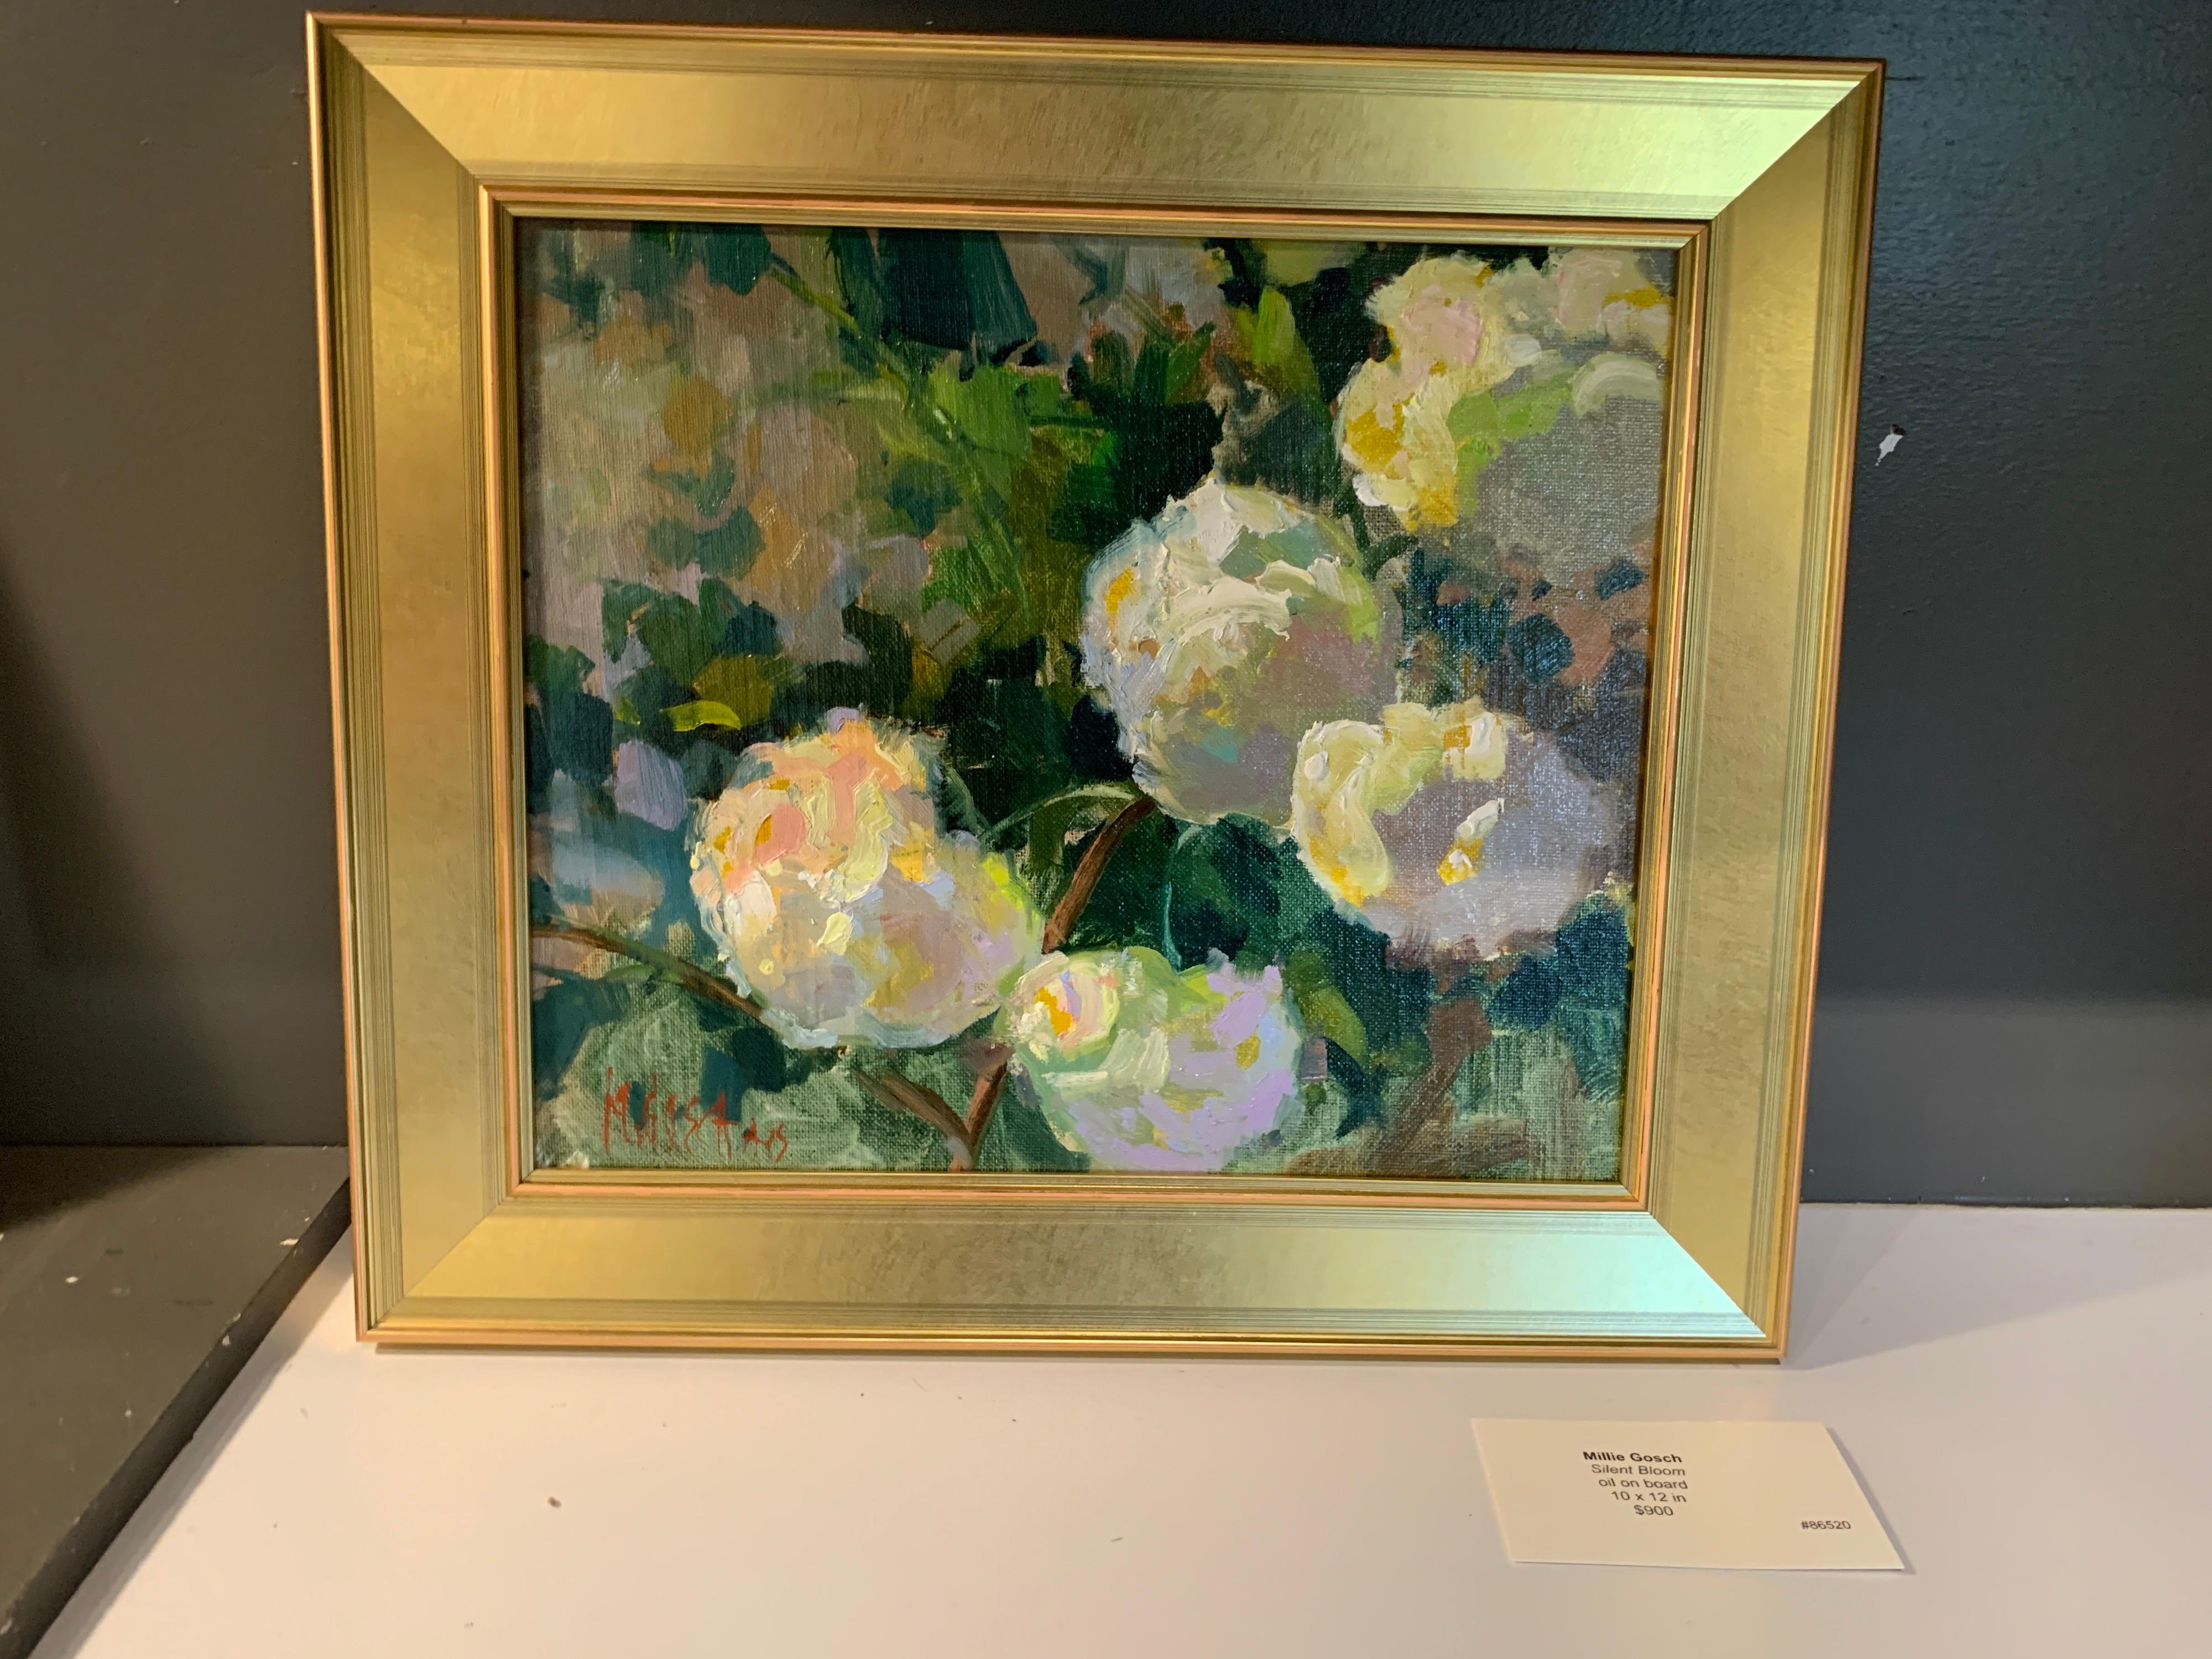 Millie Gosch is an avid plein air painter who paints studies from real life and from these studies she creates her beautiful landscape pieces. An experienced artist, she has worked for over 25 years as a professional artist using oil as her medium